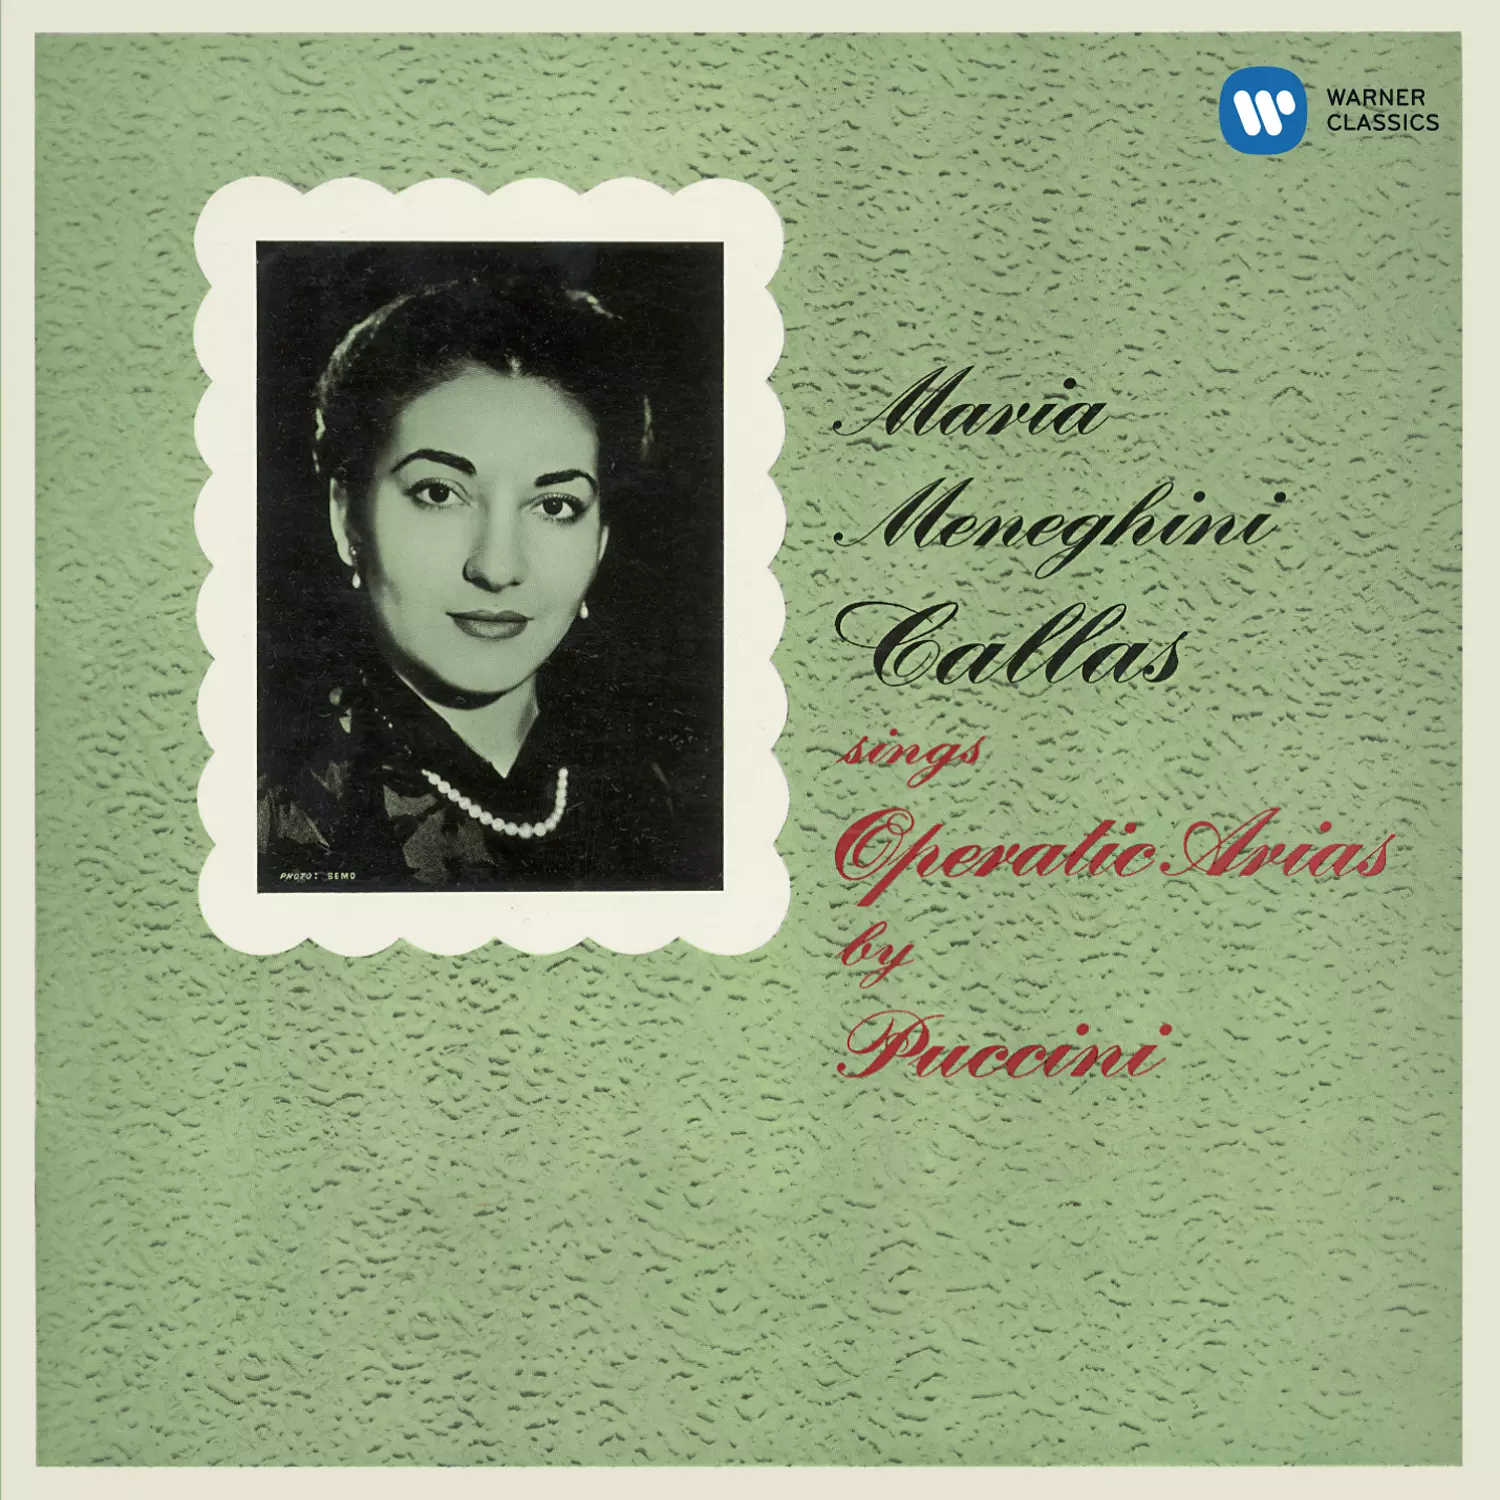 Callas sings Operatic Arias by Puccini - Callas Remastered